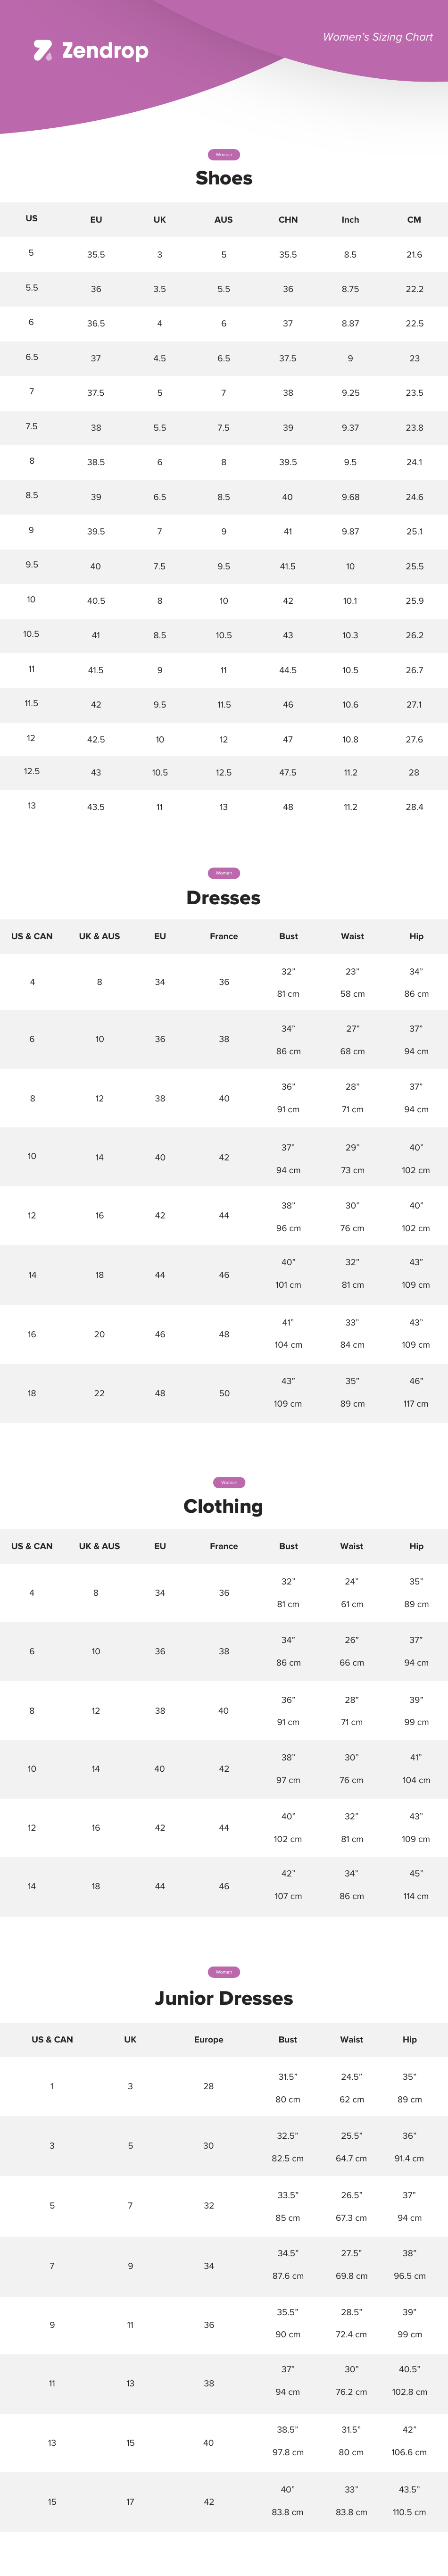 Womens Shoe and Clothing Sizing Chart, Page 1